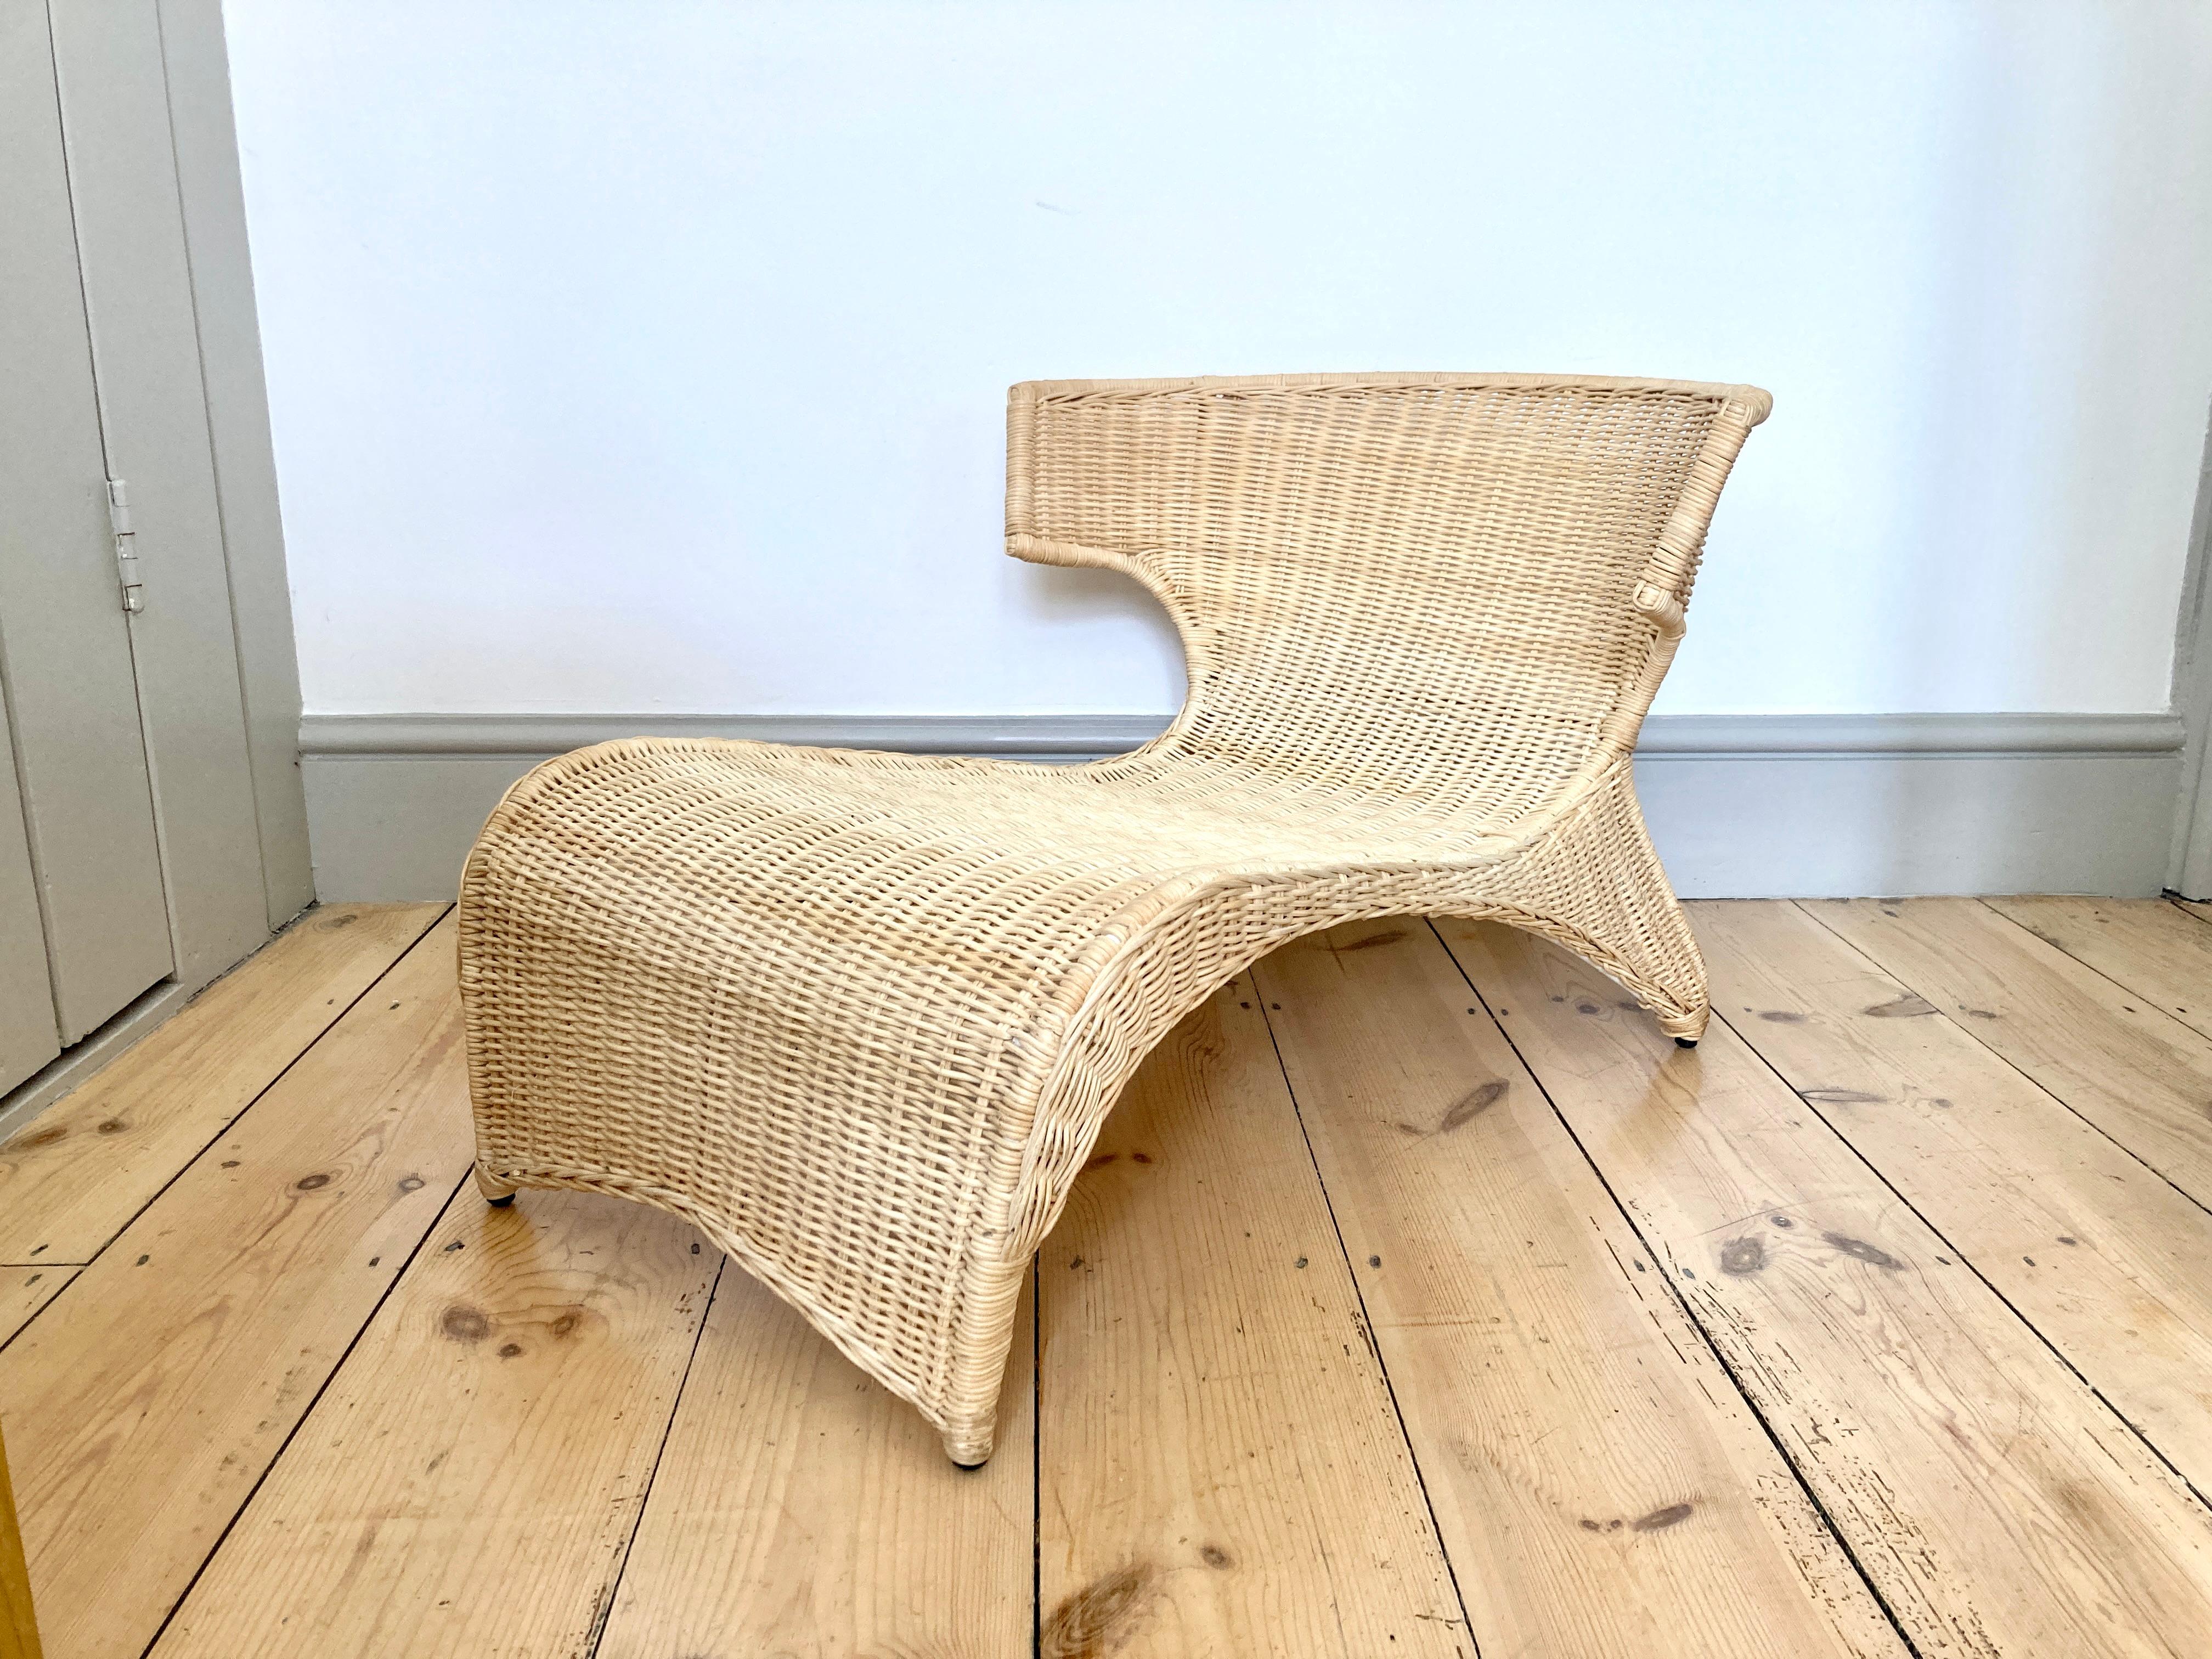 Contemporary Low Lounge Chair / Chaise Longue by Monika Mulder for Ikea Savo Natural Rattan